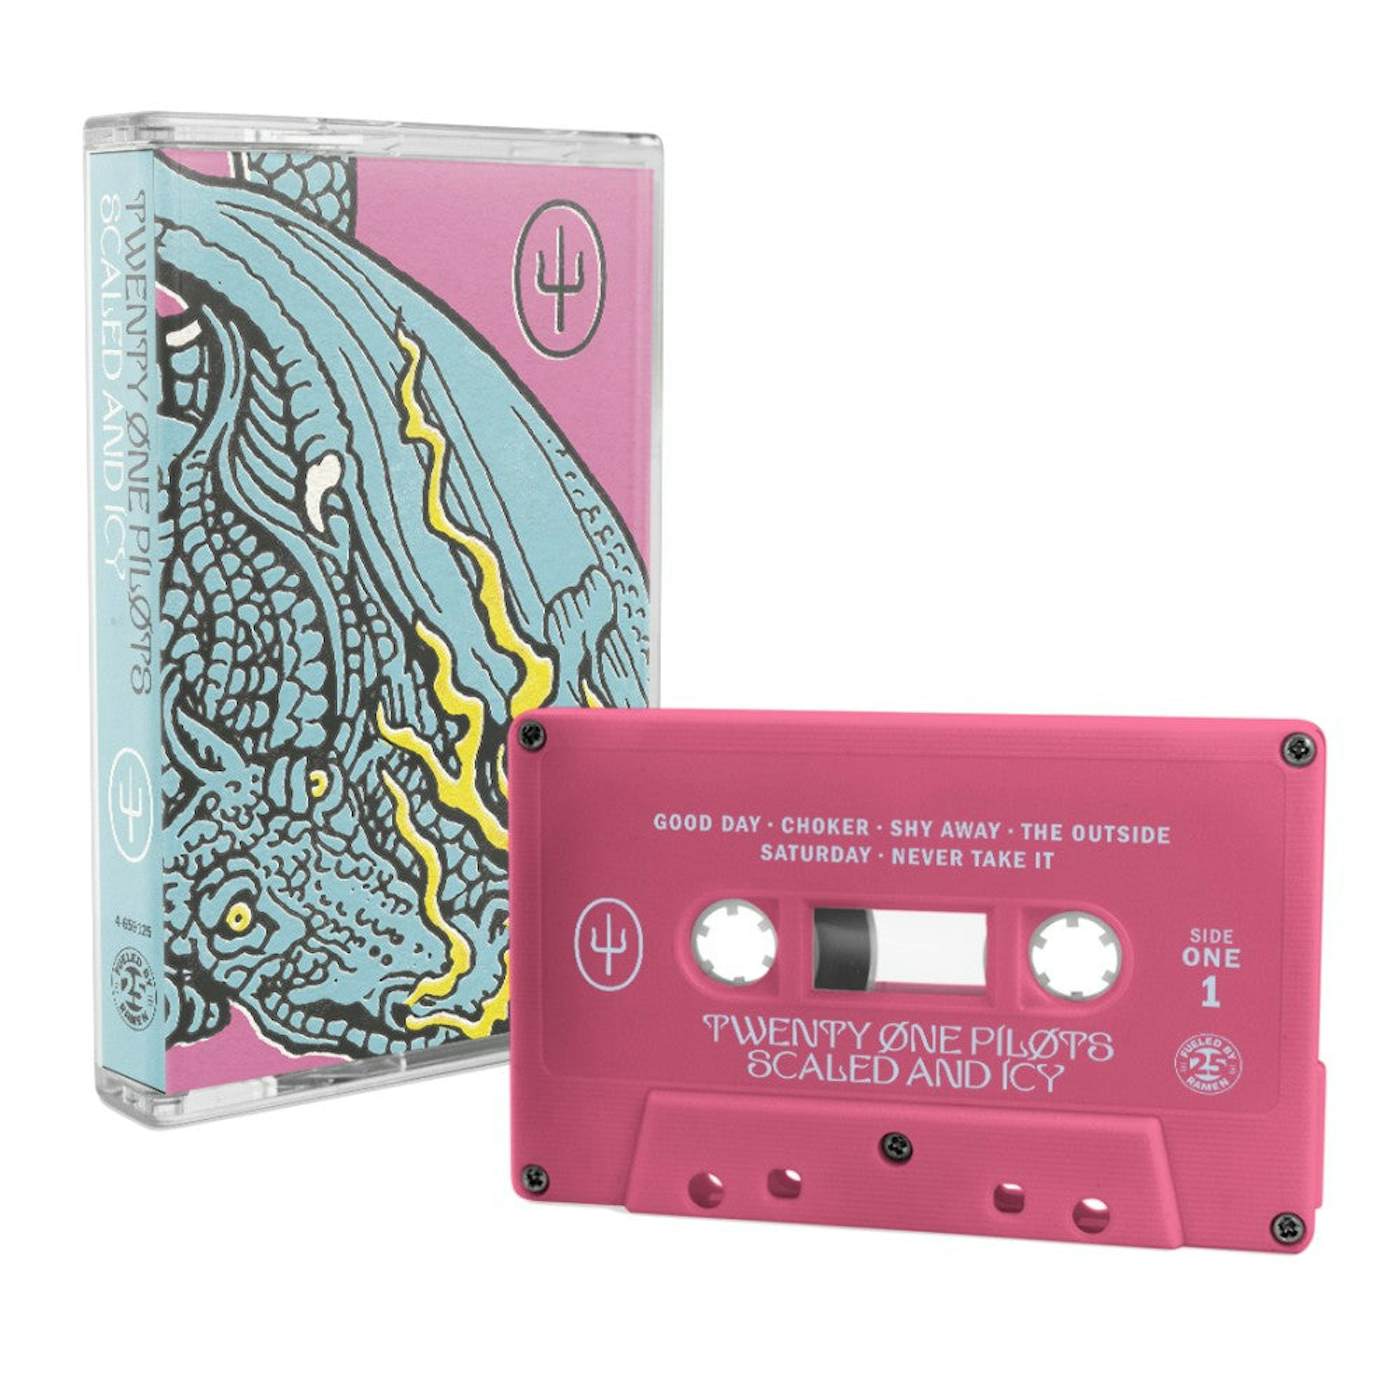 Twenty One Pilots Scaled and Icy (Pink Cassette)